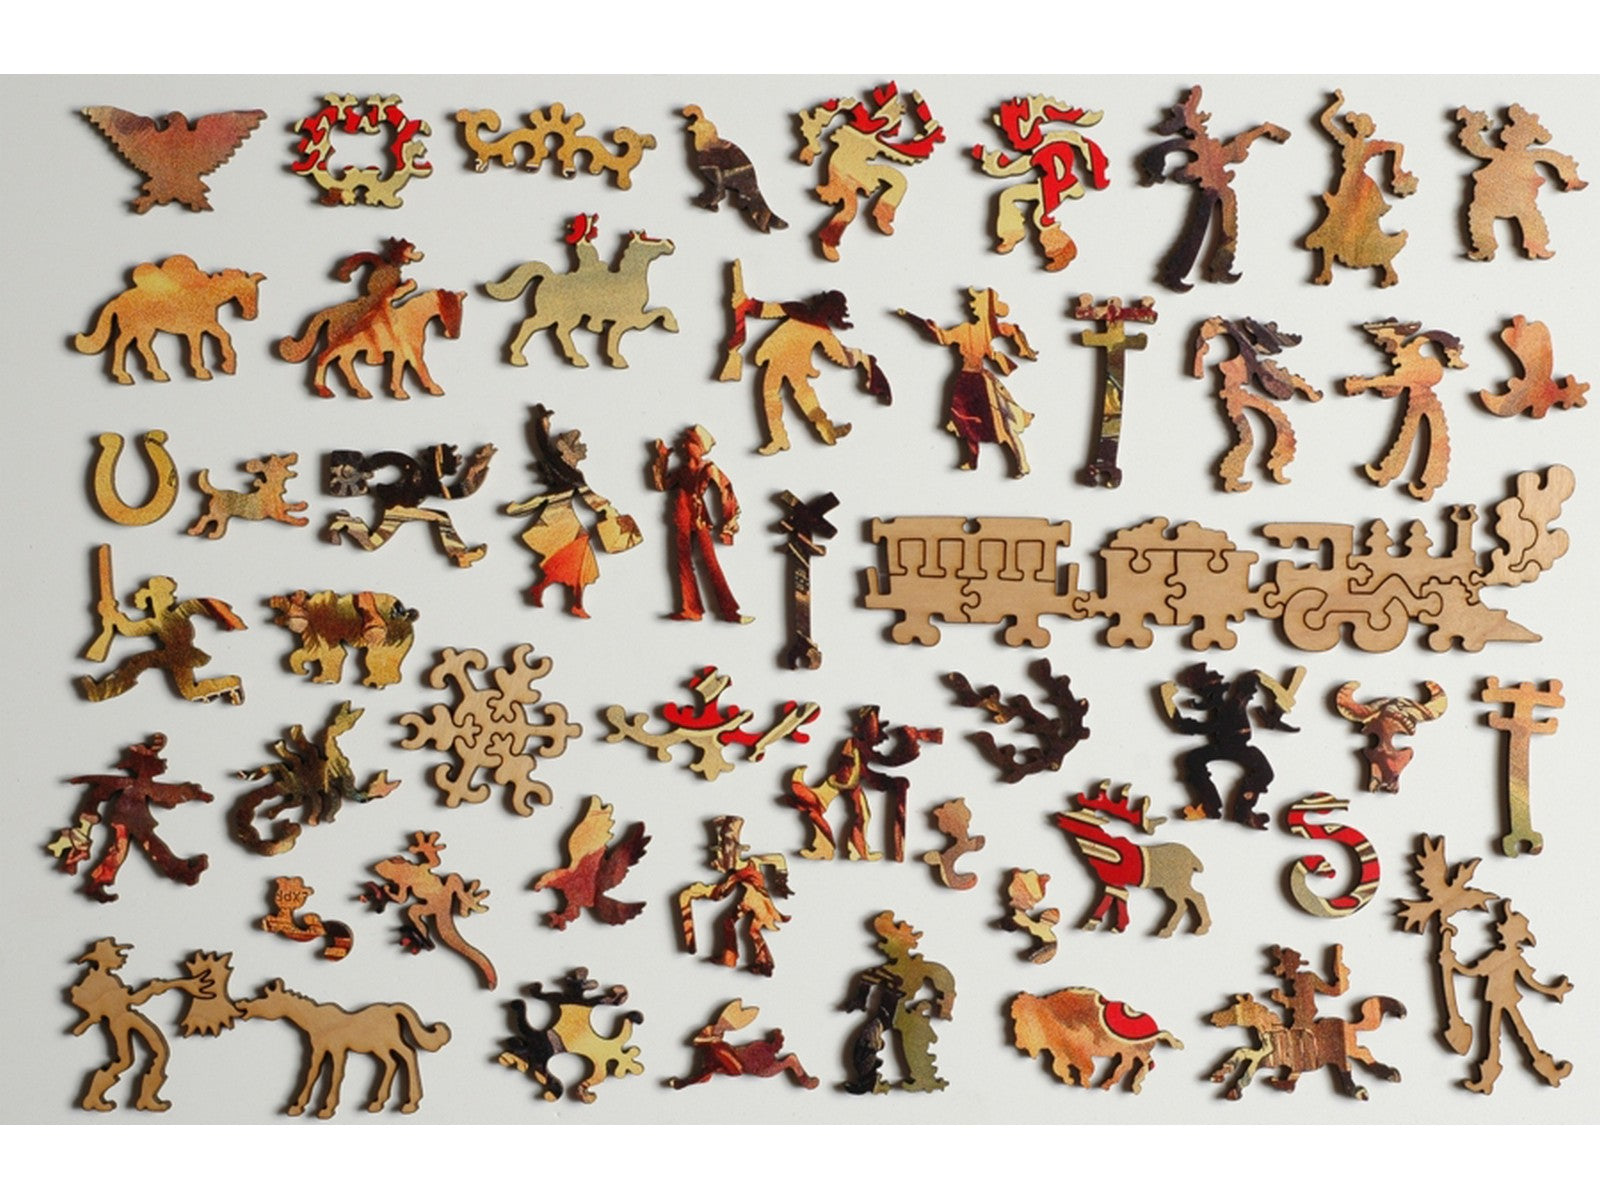 The whimsy pieces that can be found in the puzzle, Buffalo Bill: The Great Train Holdup.